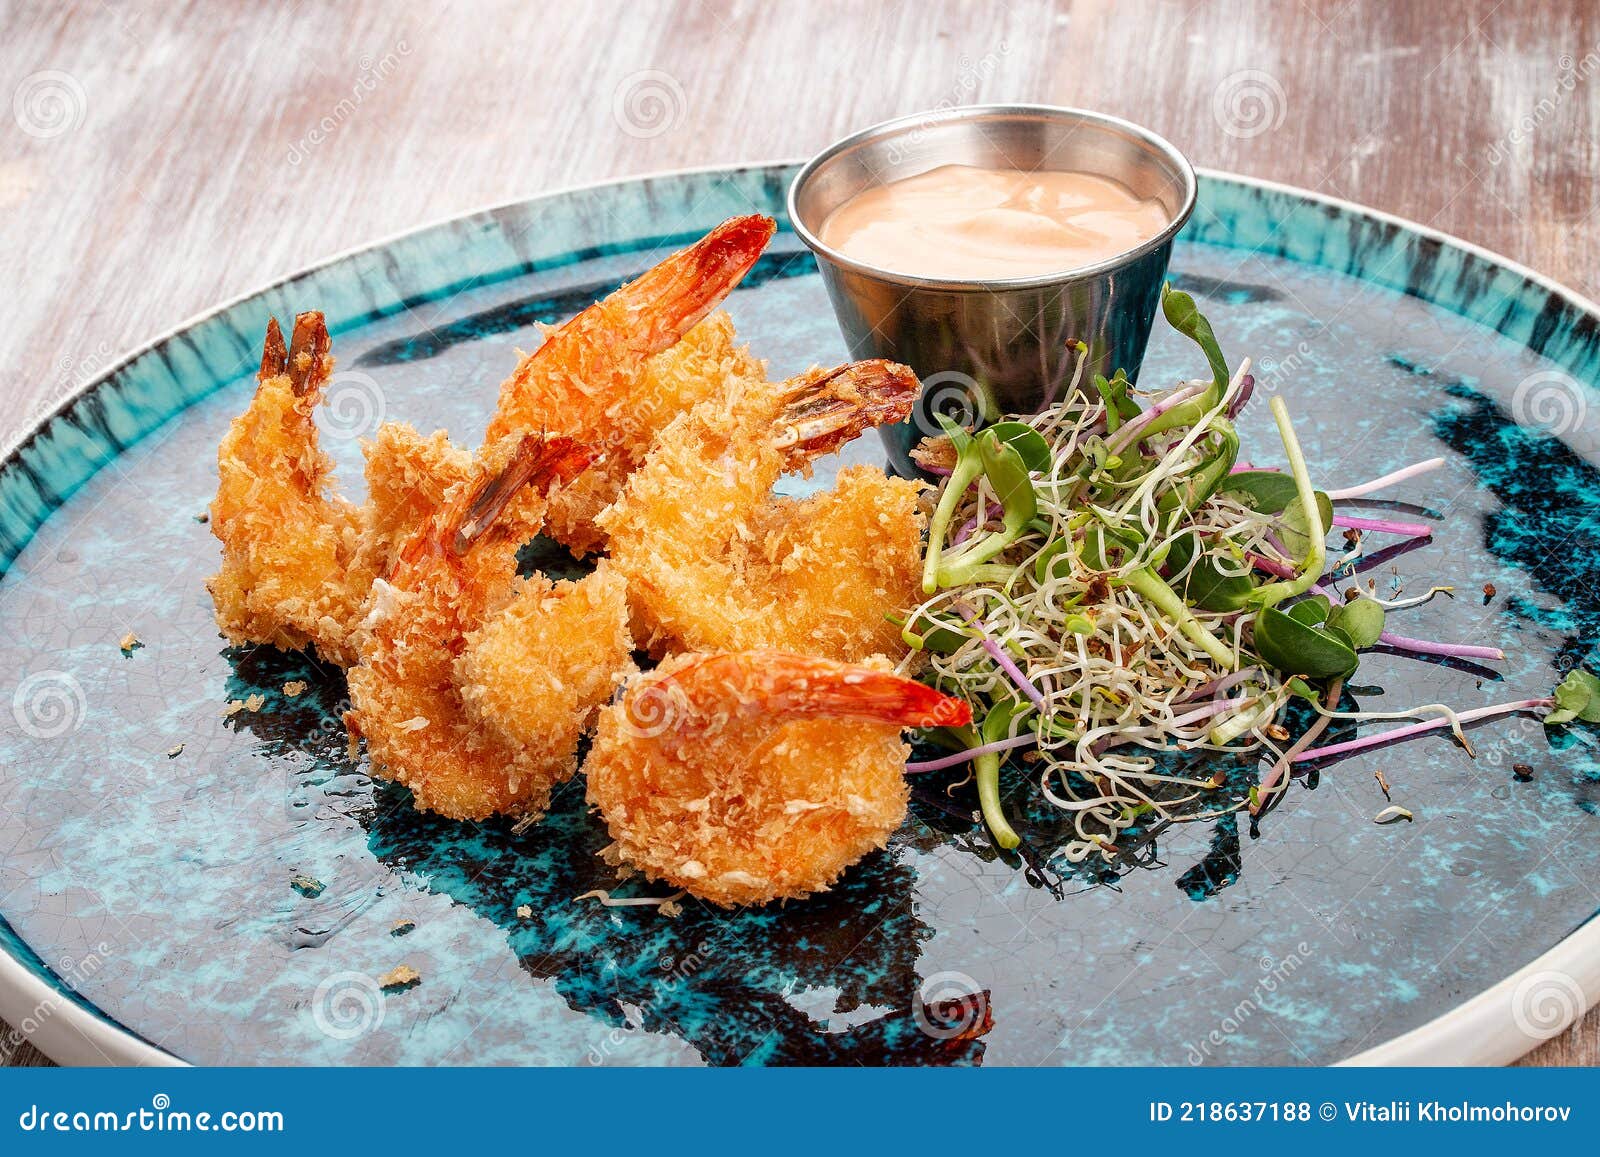 Fried Tiger Prawns with Sauce on a Decorative Plate Stock Photo - Image ...